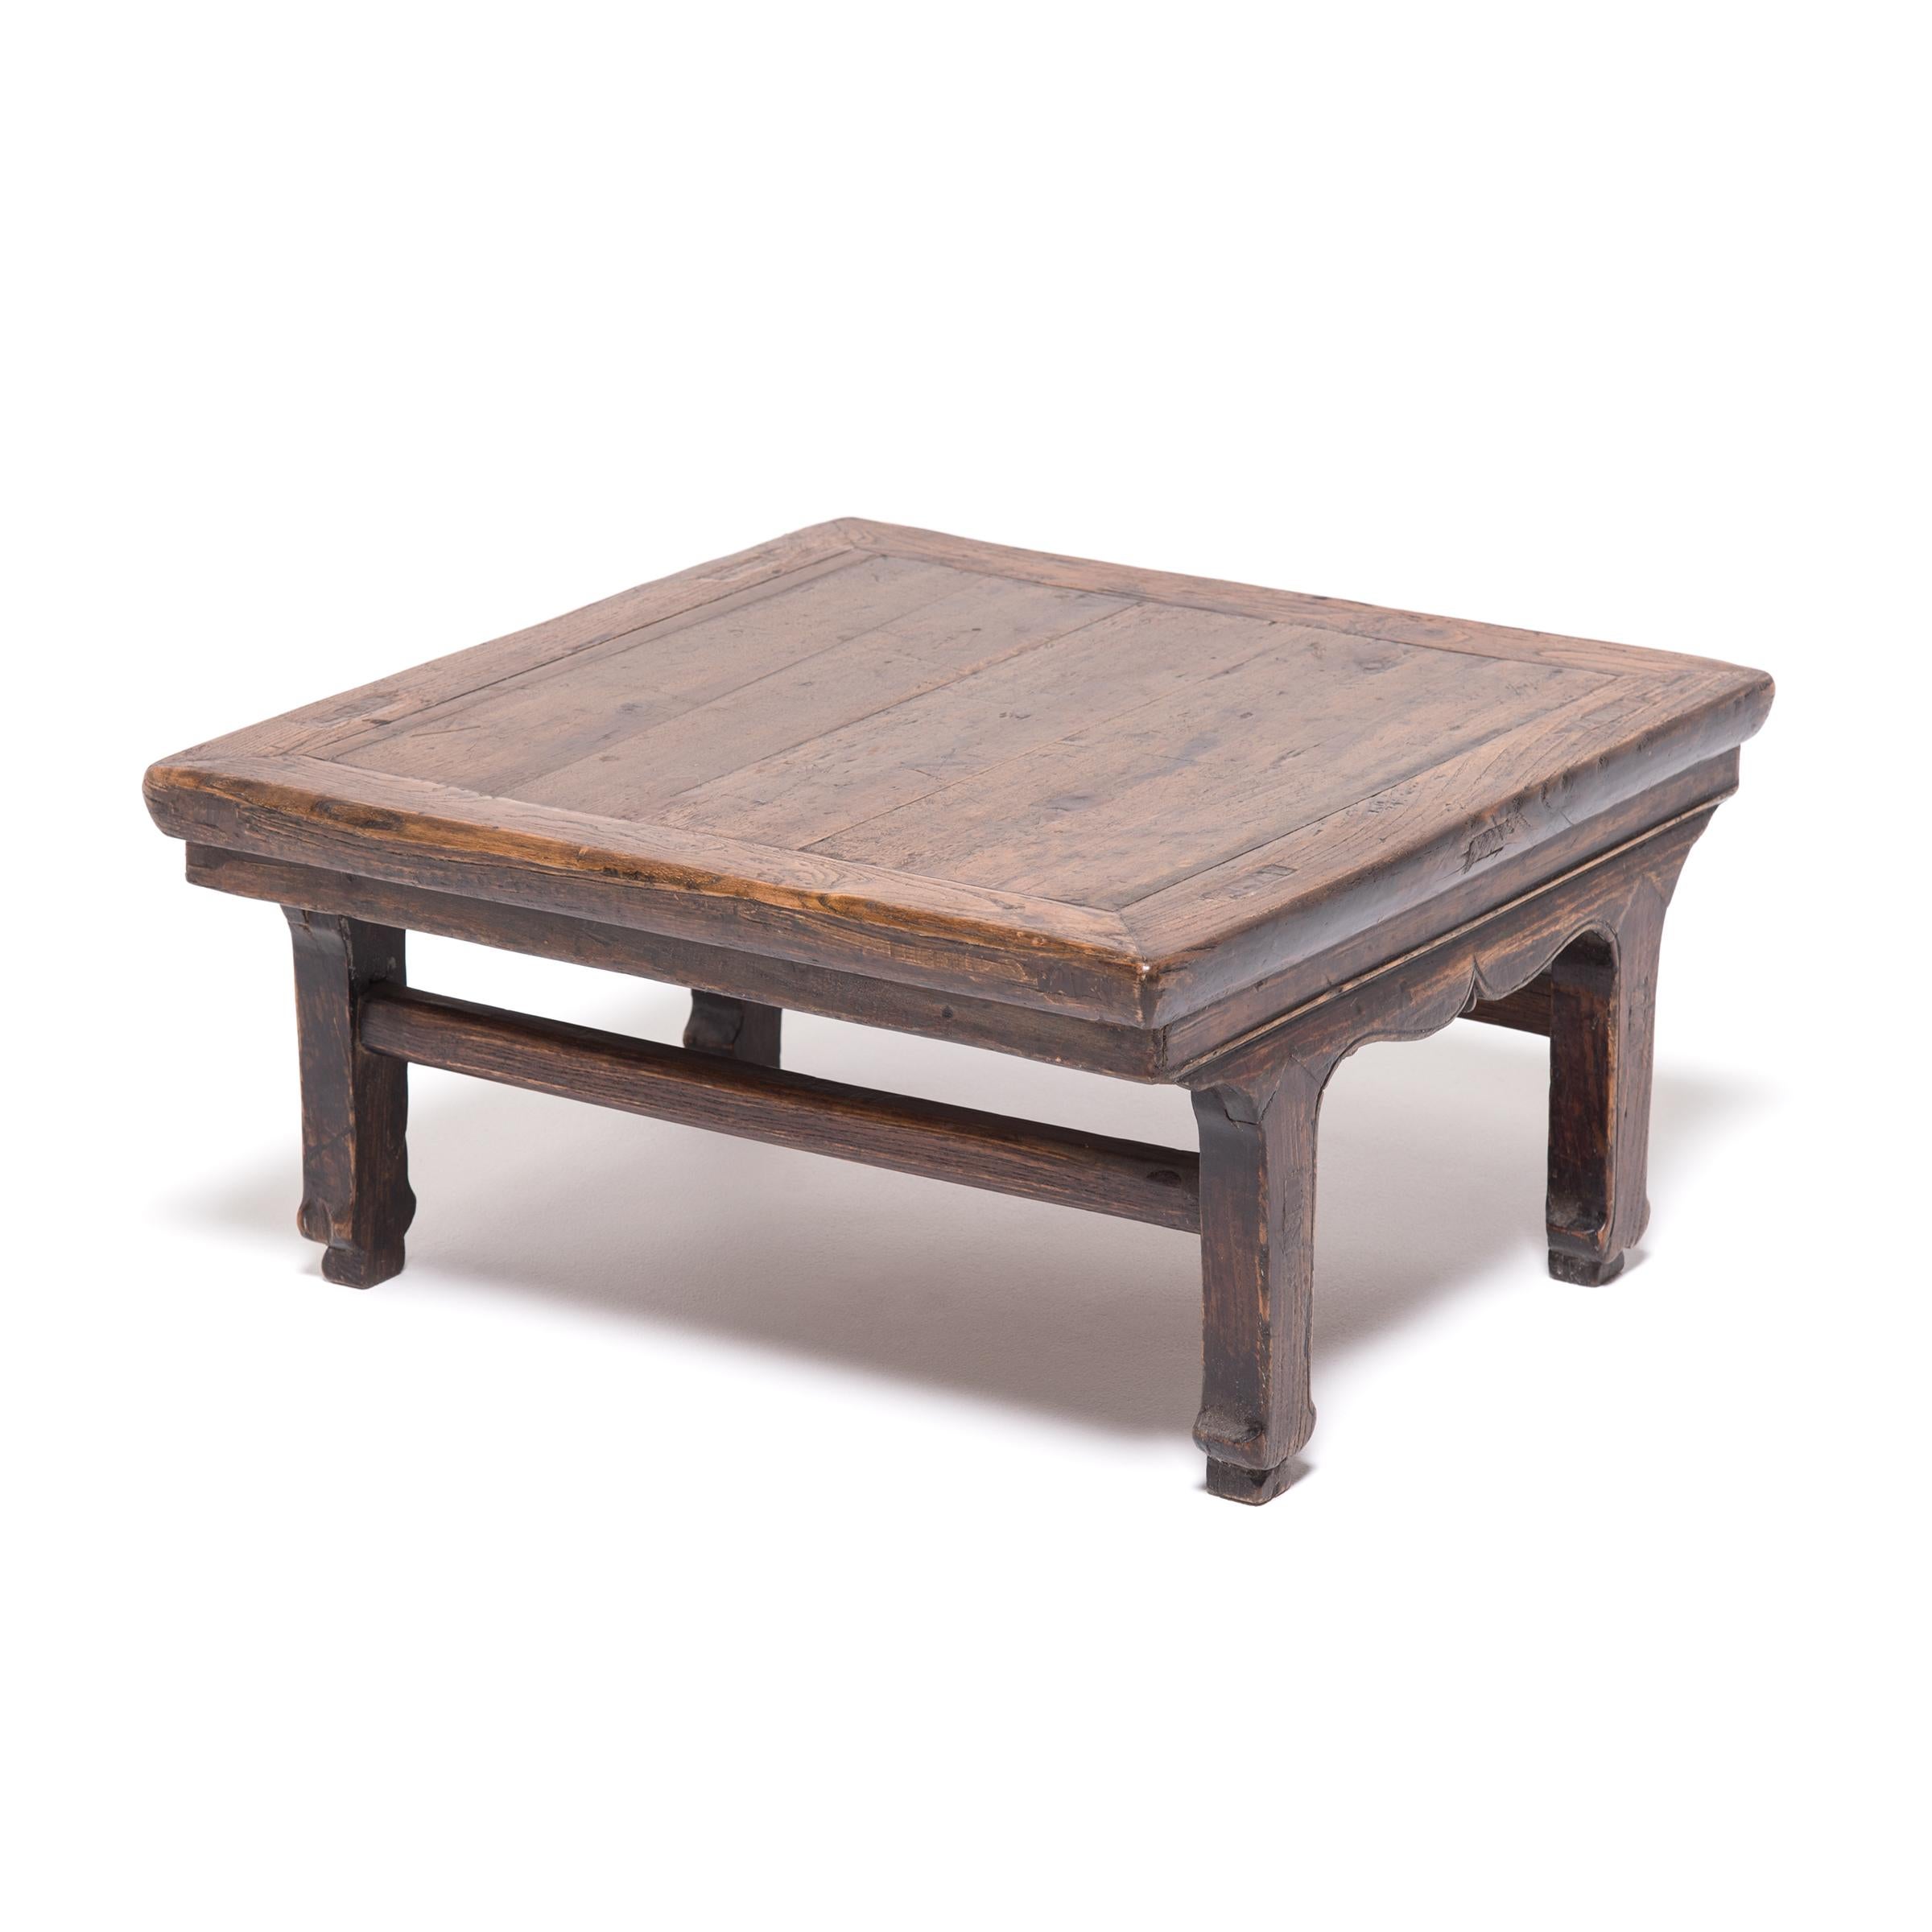 Chinois Table basse chinoise provinciale, vers 1875 en vente